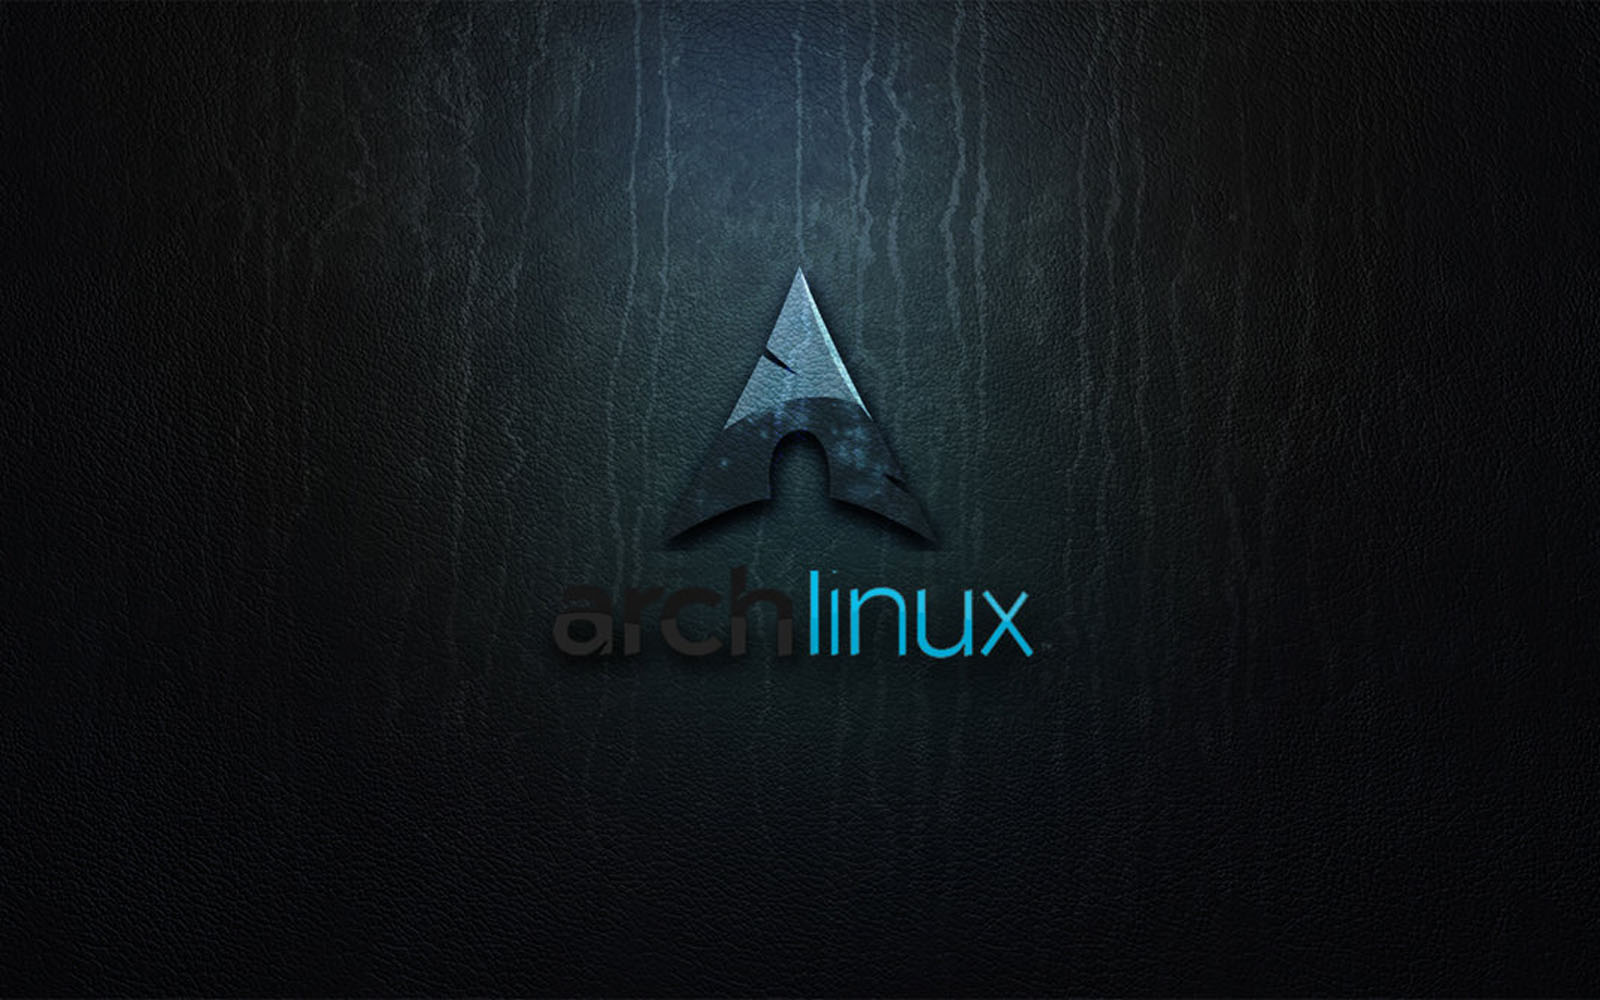 Arch Linux Wallpaper On